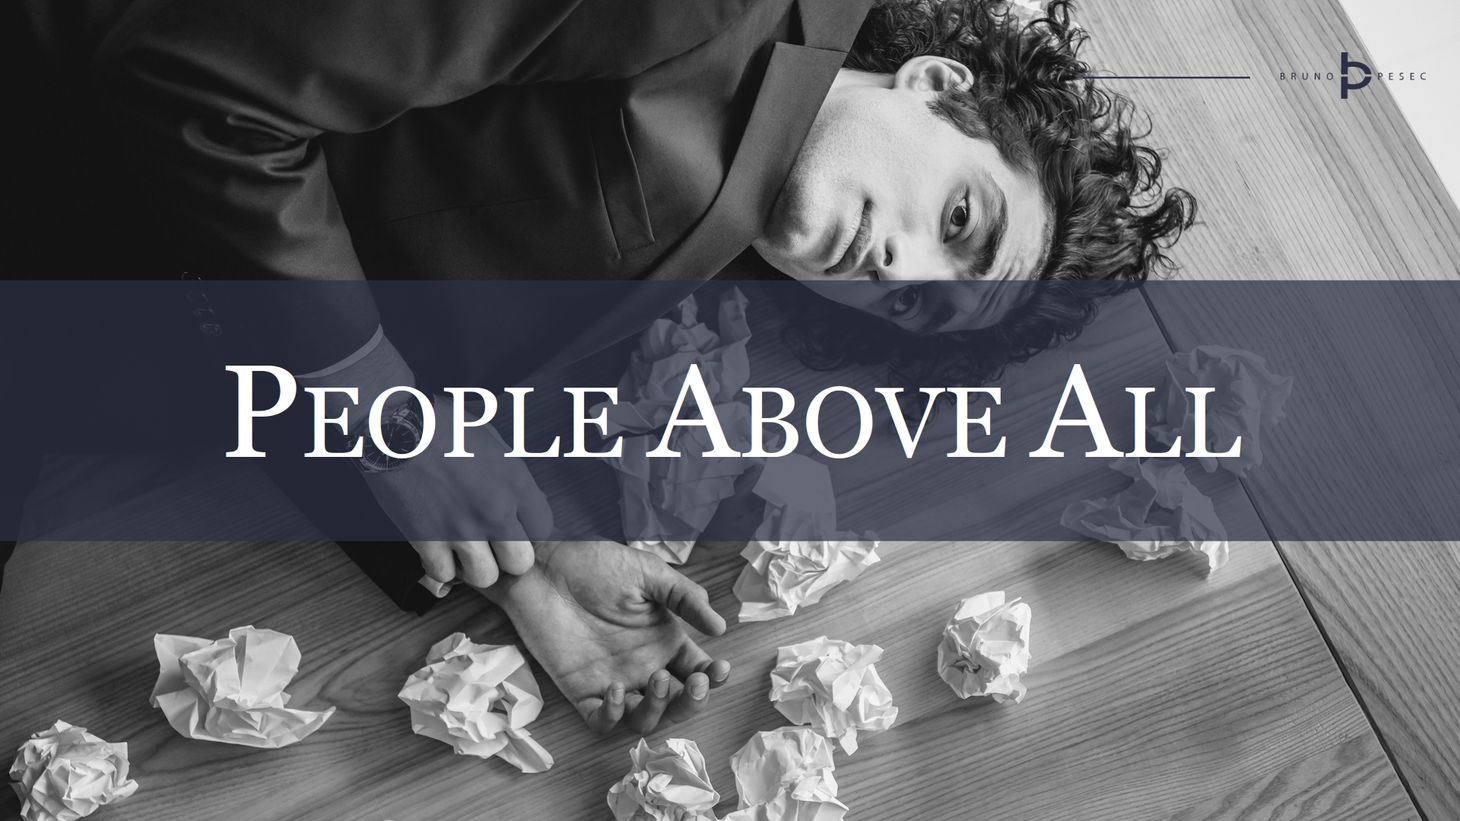 People above all